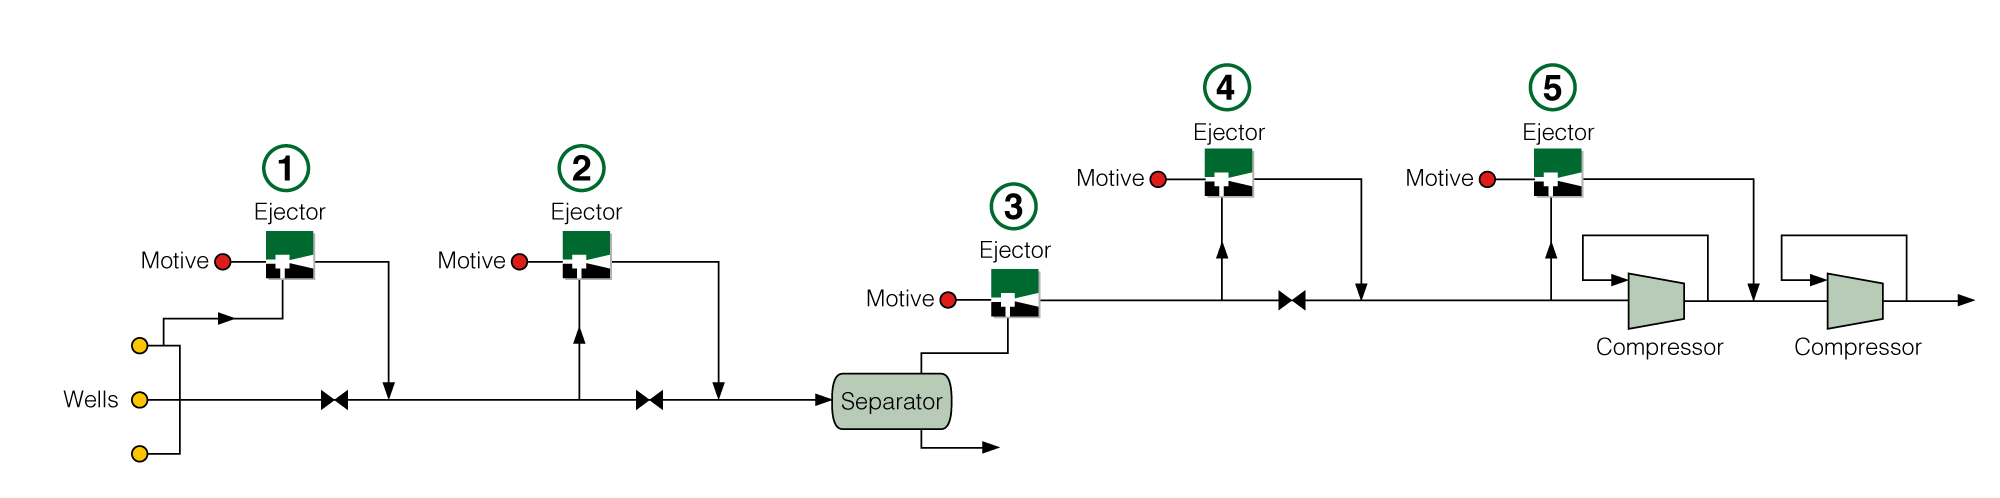 Production Boosting Options using Ejectors